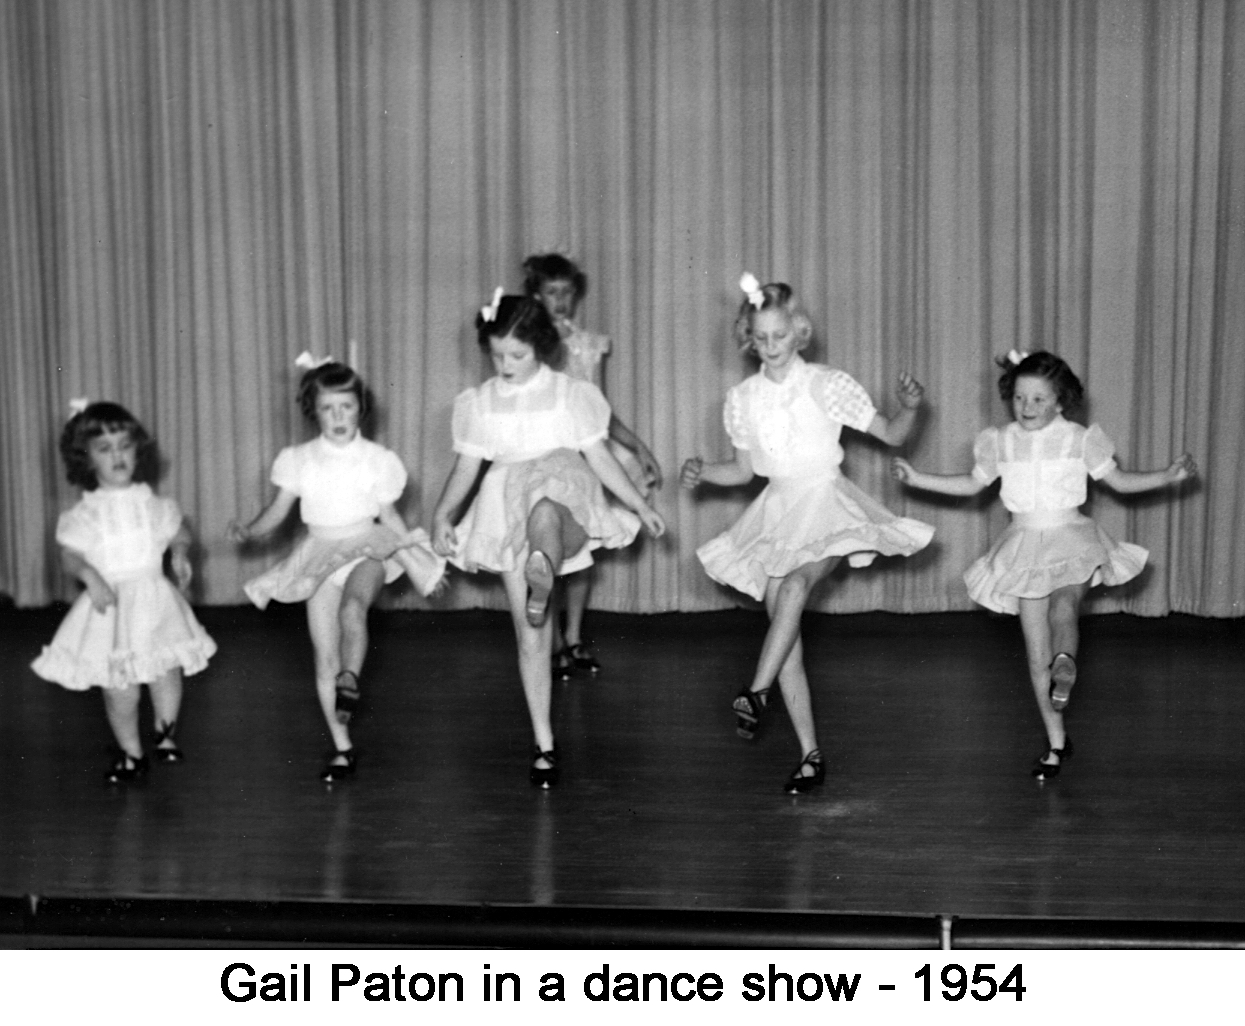 8-year-old Gail Paton kicking up a leg with other dancers on stage 